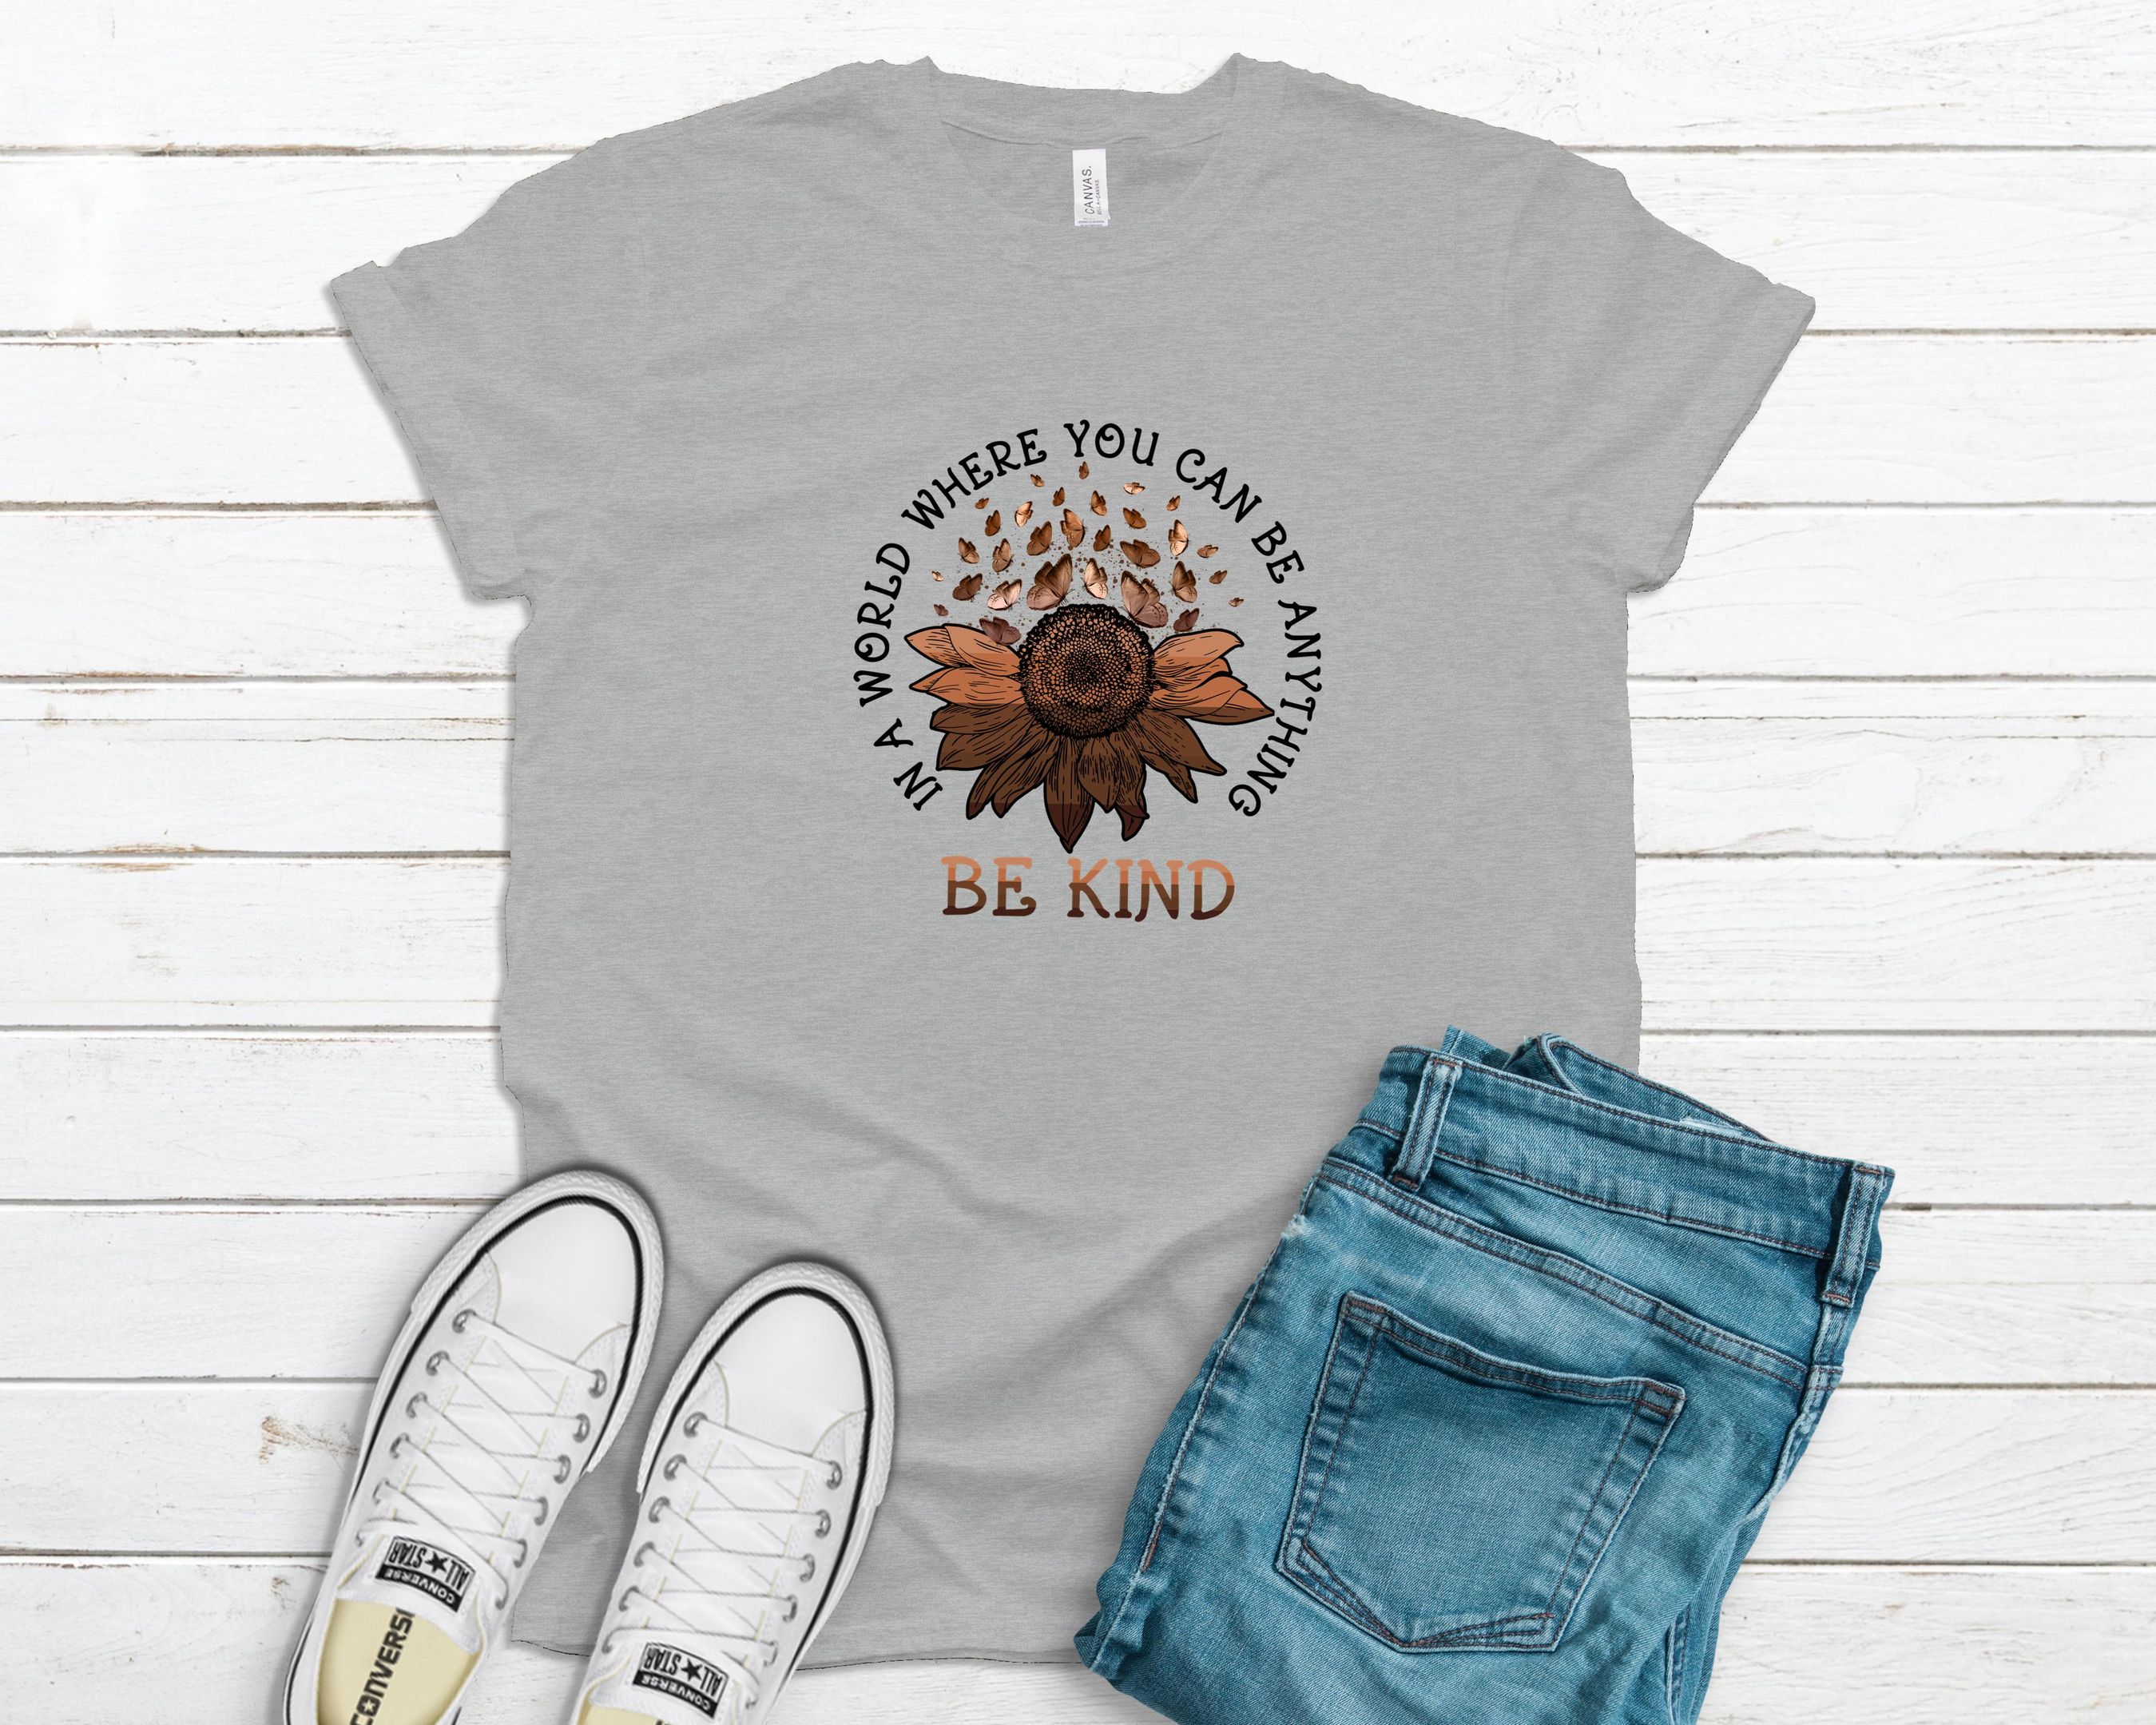 In A World Where You Can Be Anything Be Kind Melanin Shirt, Black Lives Matter Shirt